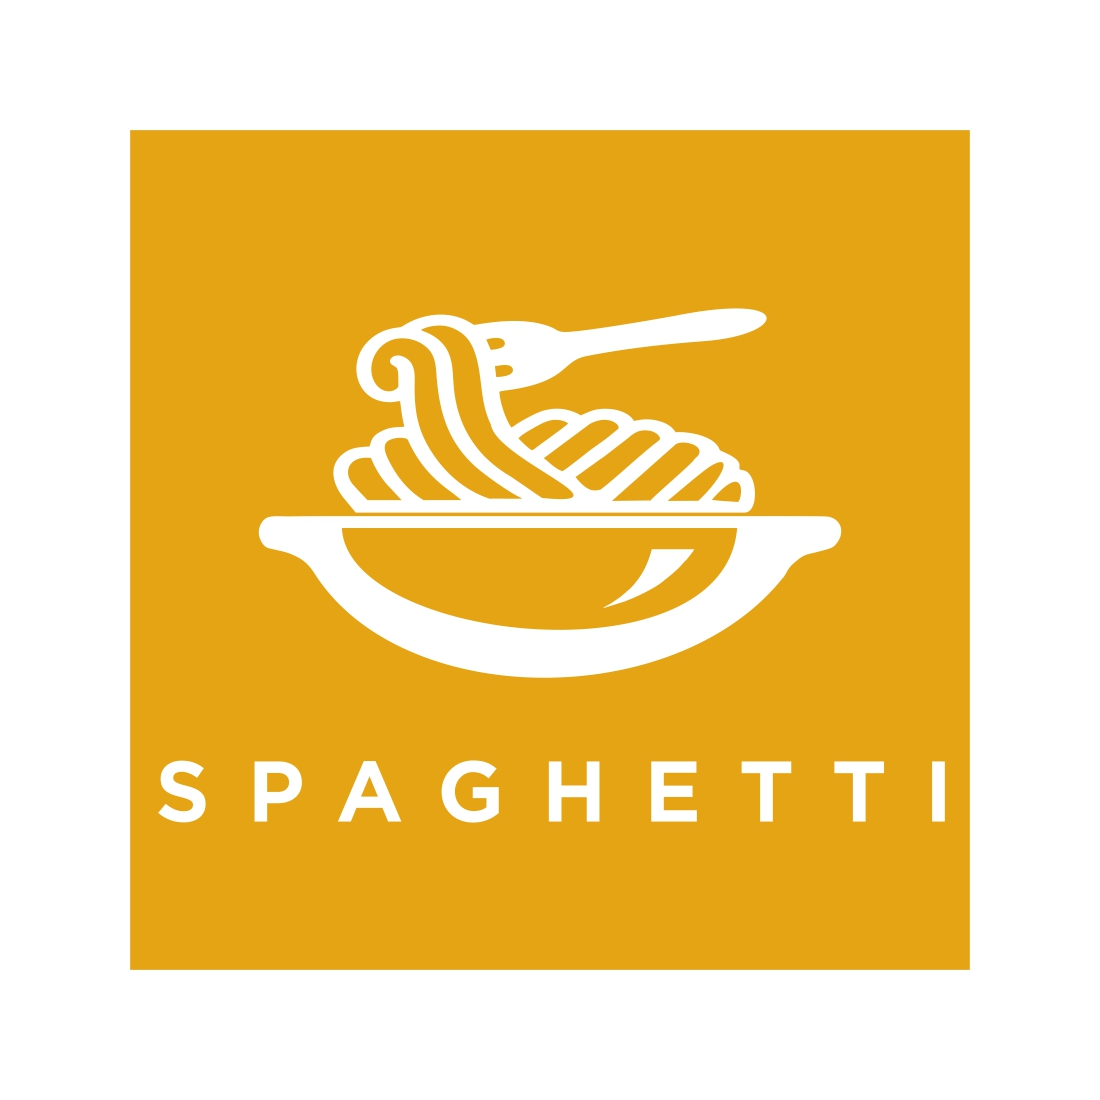 Pastas icon or logo isolated on white Vector stylized Spaghetti or noodle with fork template for internet, design, decoration Authentic Italian food preview image.